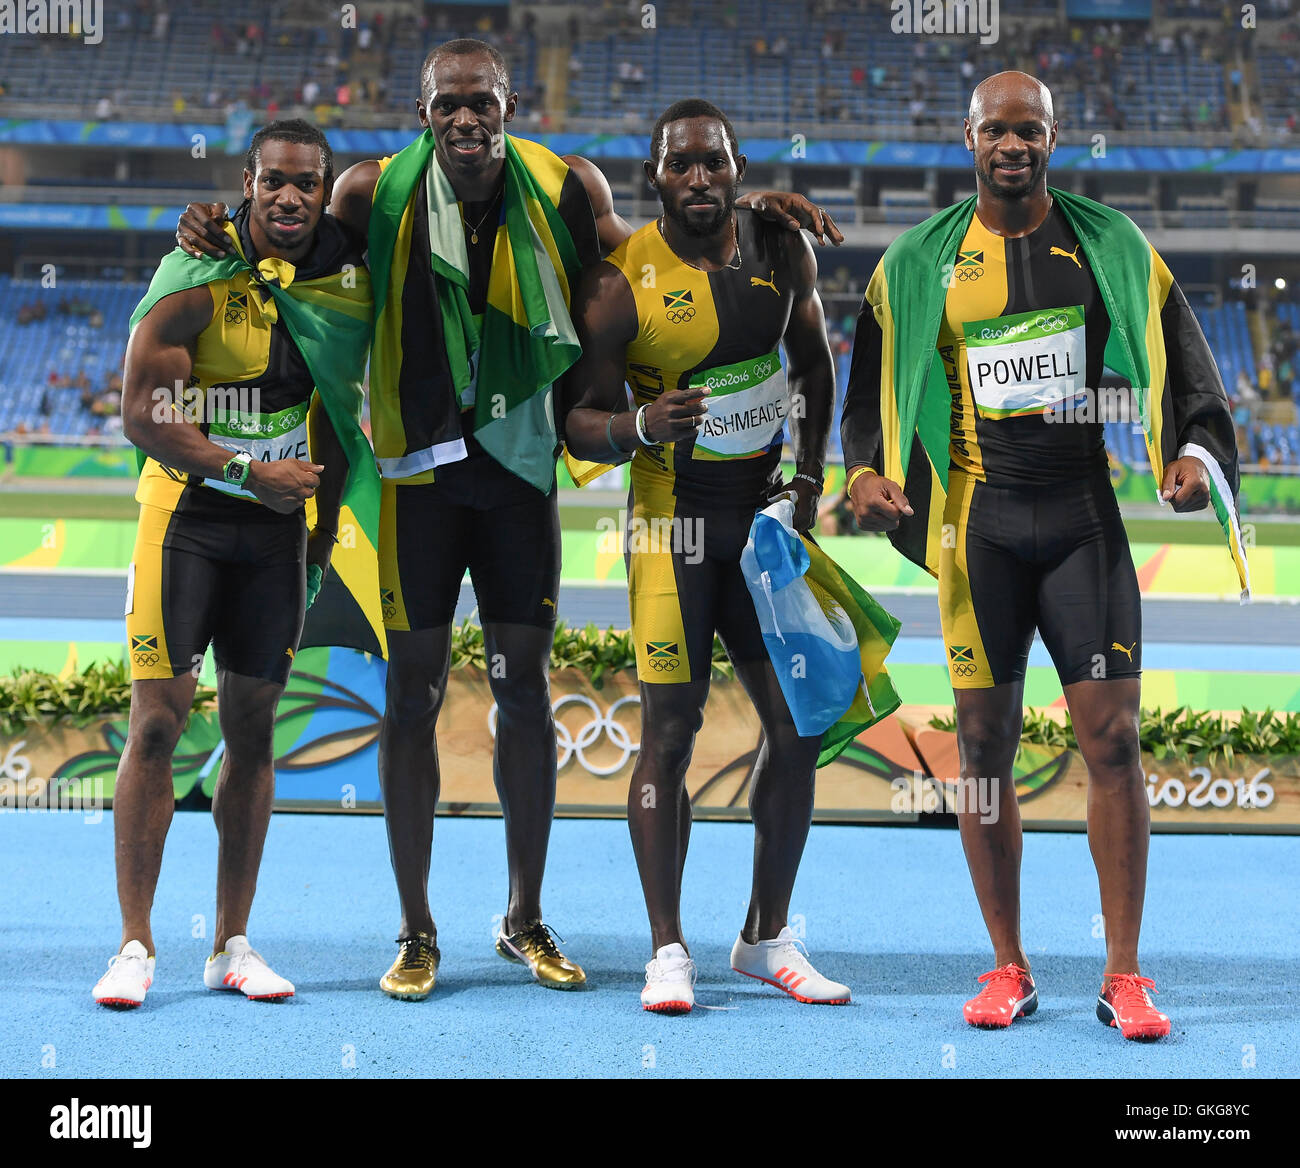 Rio de Janeiro, Brazil. 19th August, 2016. Yohan Blake, Usain Bolt, Nickel Ashmeade and Asafa Powell of Jamaica which won the mens 4x100m relay final during the (EVENT) on Day 14 Athletics of the 2016 Rio Olympics at Olympic Stadium on August 19, 2016 in Rio de Janeiro, Brazil. Credit:  Roger Sedres/Alamy Live News Stock Photo